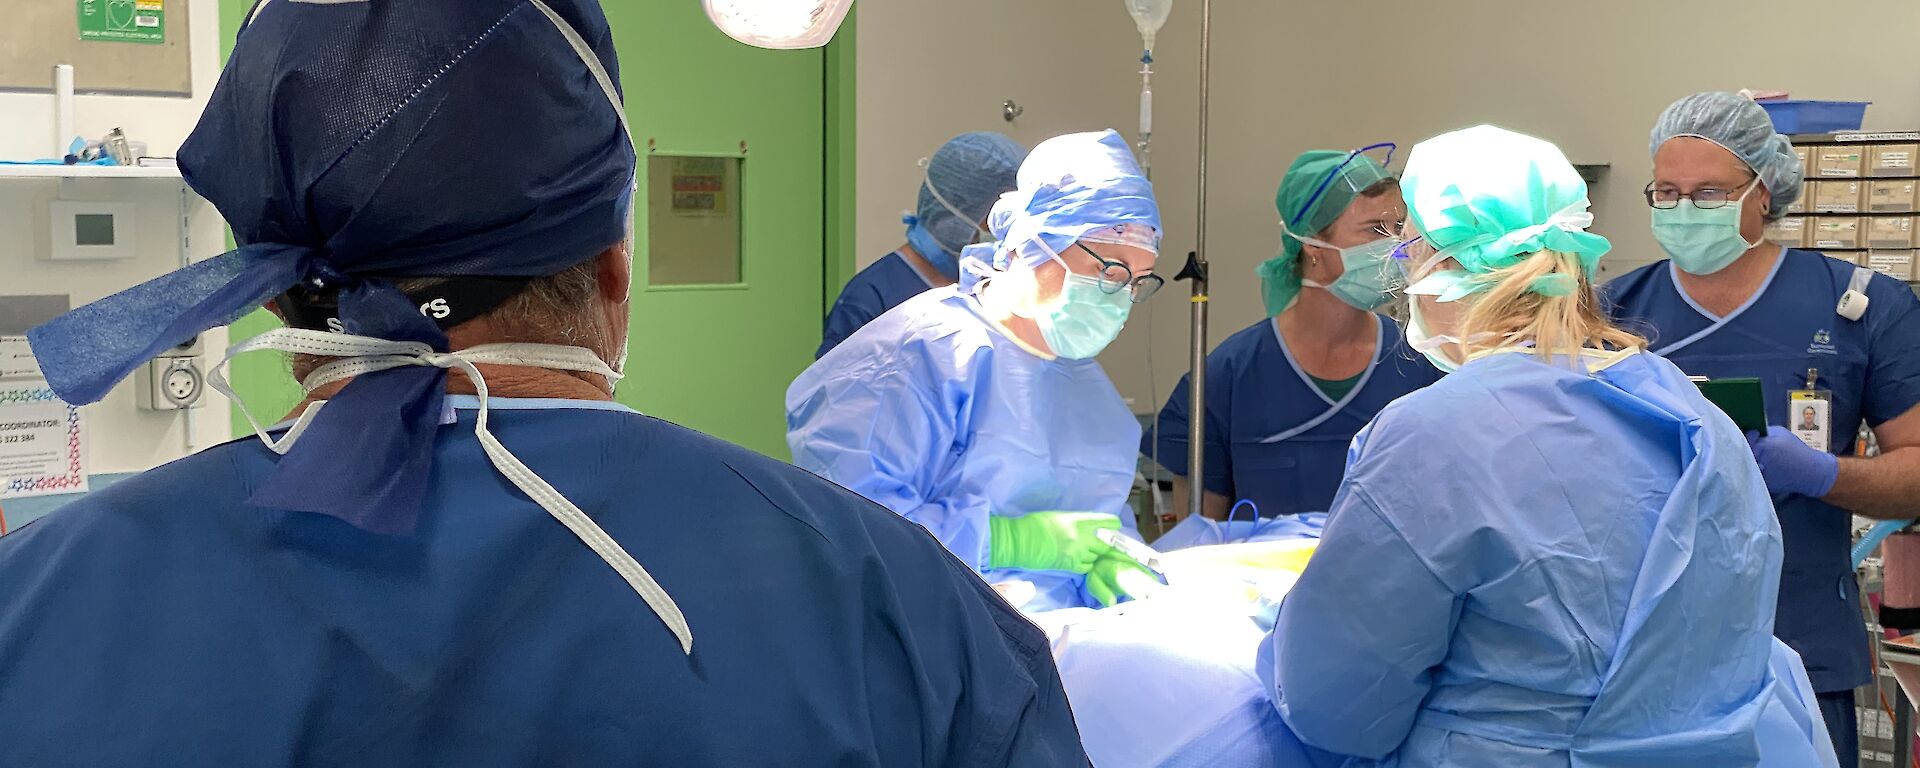 Back of man in surgical scrubs, watching several others in the operating theatre